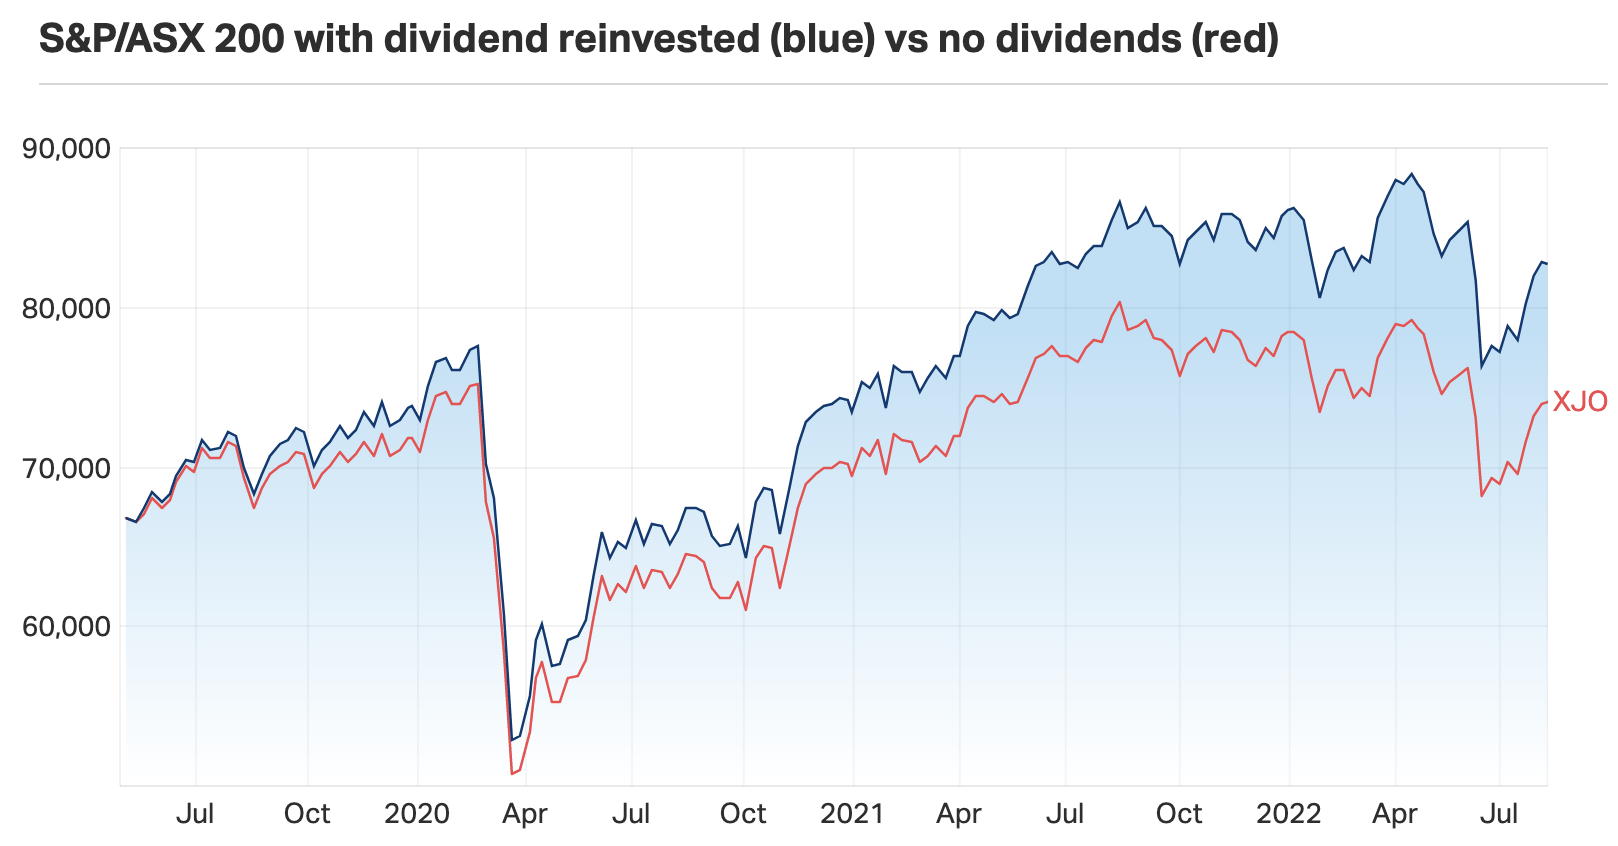 Chart of S&P/ASX 200 Index with and without dividends